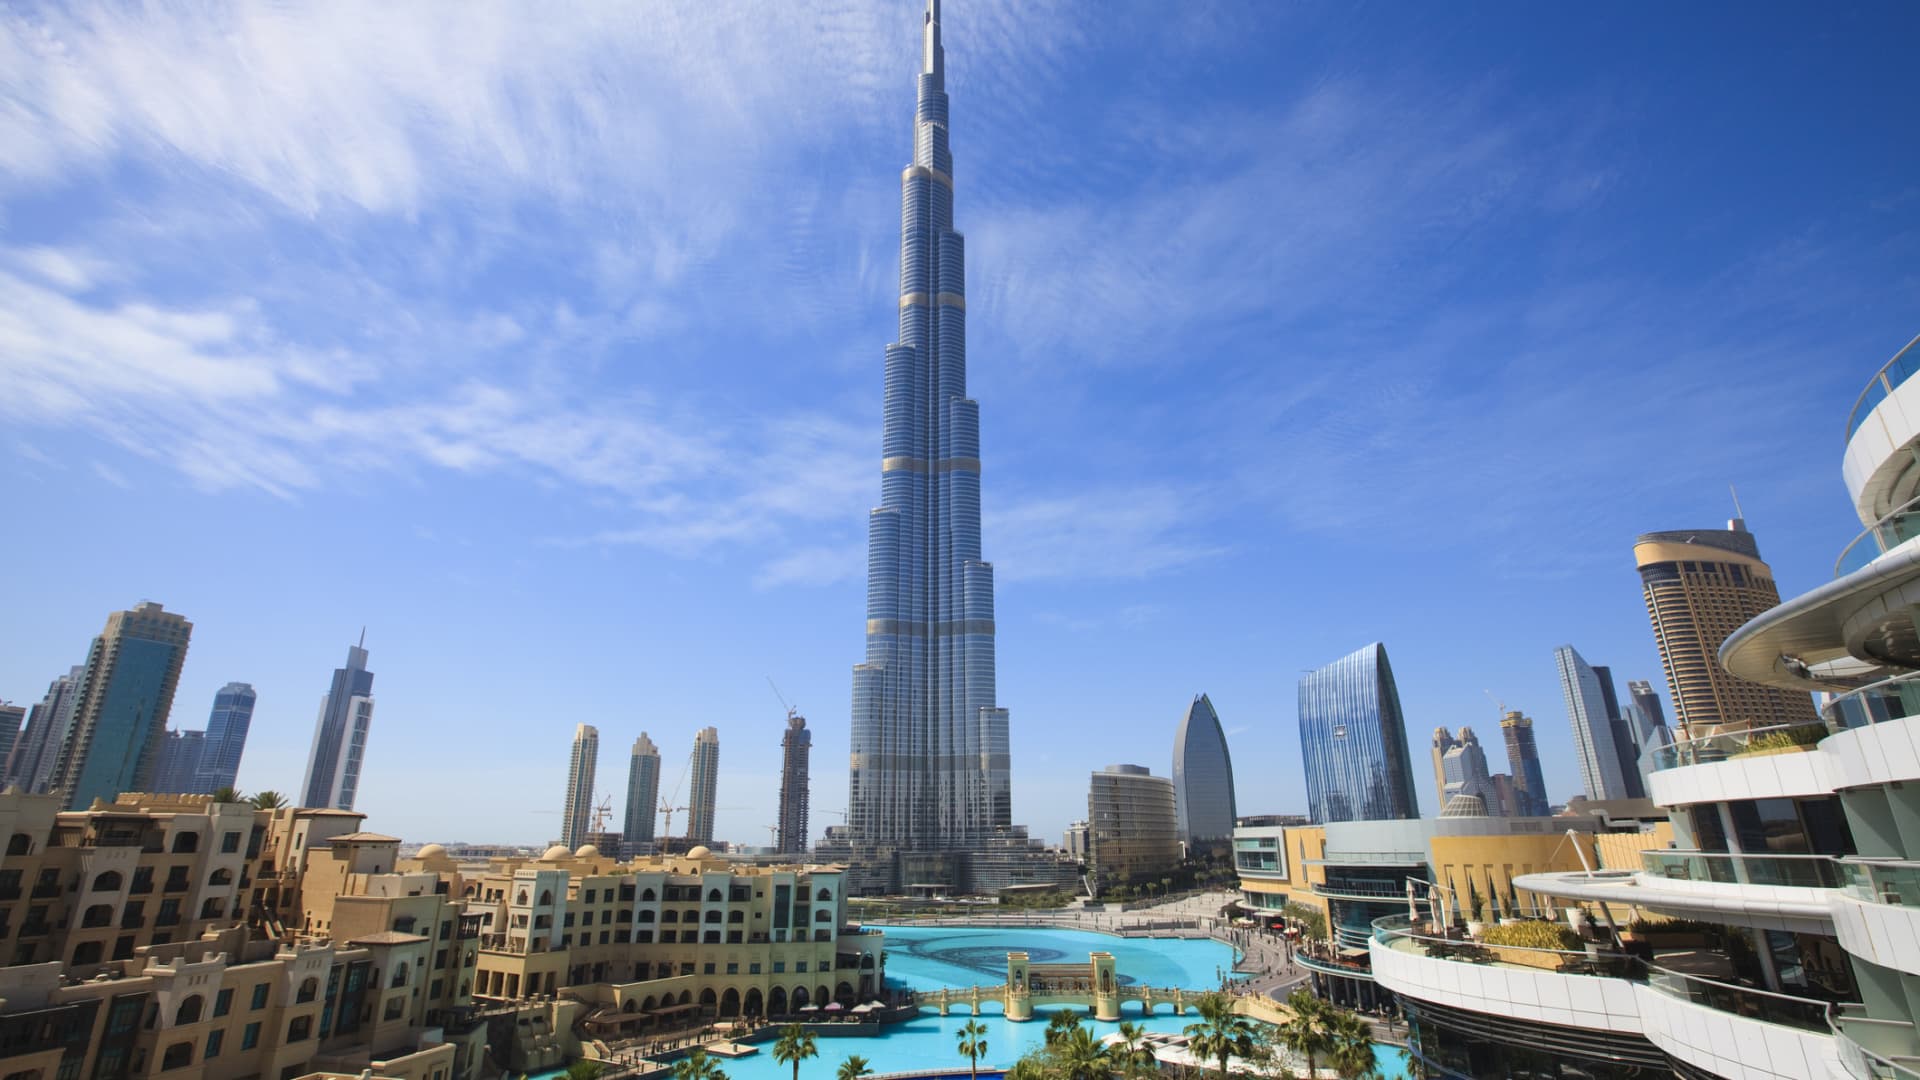 With more than 160 stories, the Burj Khalifa is 2,716 feet tall, or more than twice the height of New York's 1,250-foot Empire State Building, in Dubai.